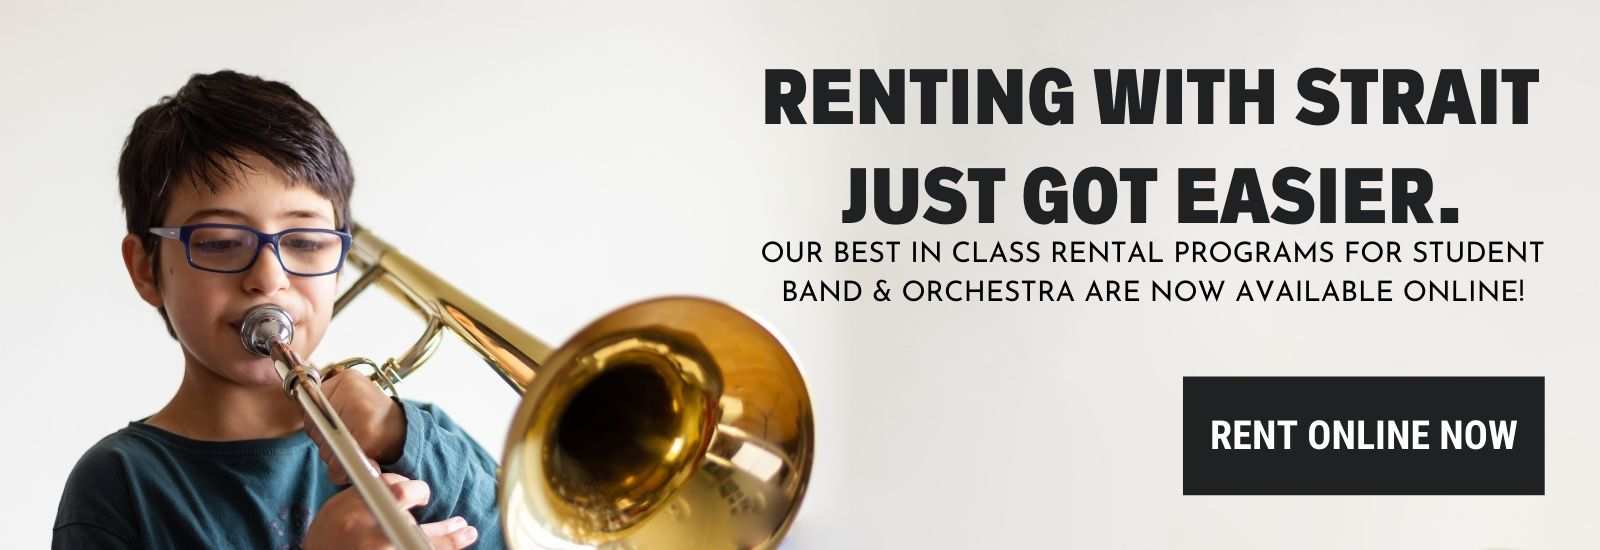 Start Renting Band and Orchestra with Strait Music Rentals